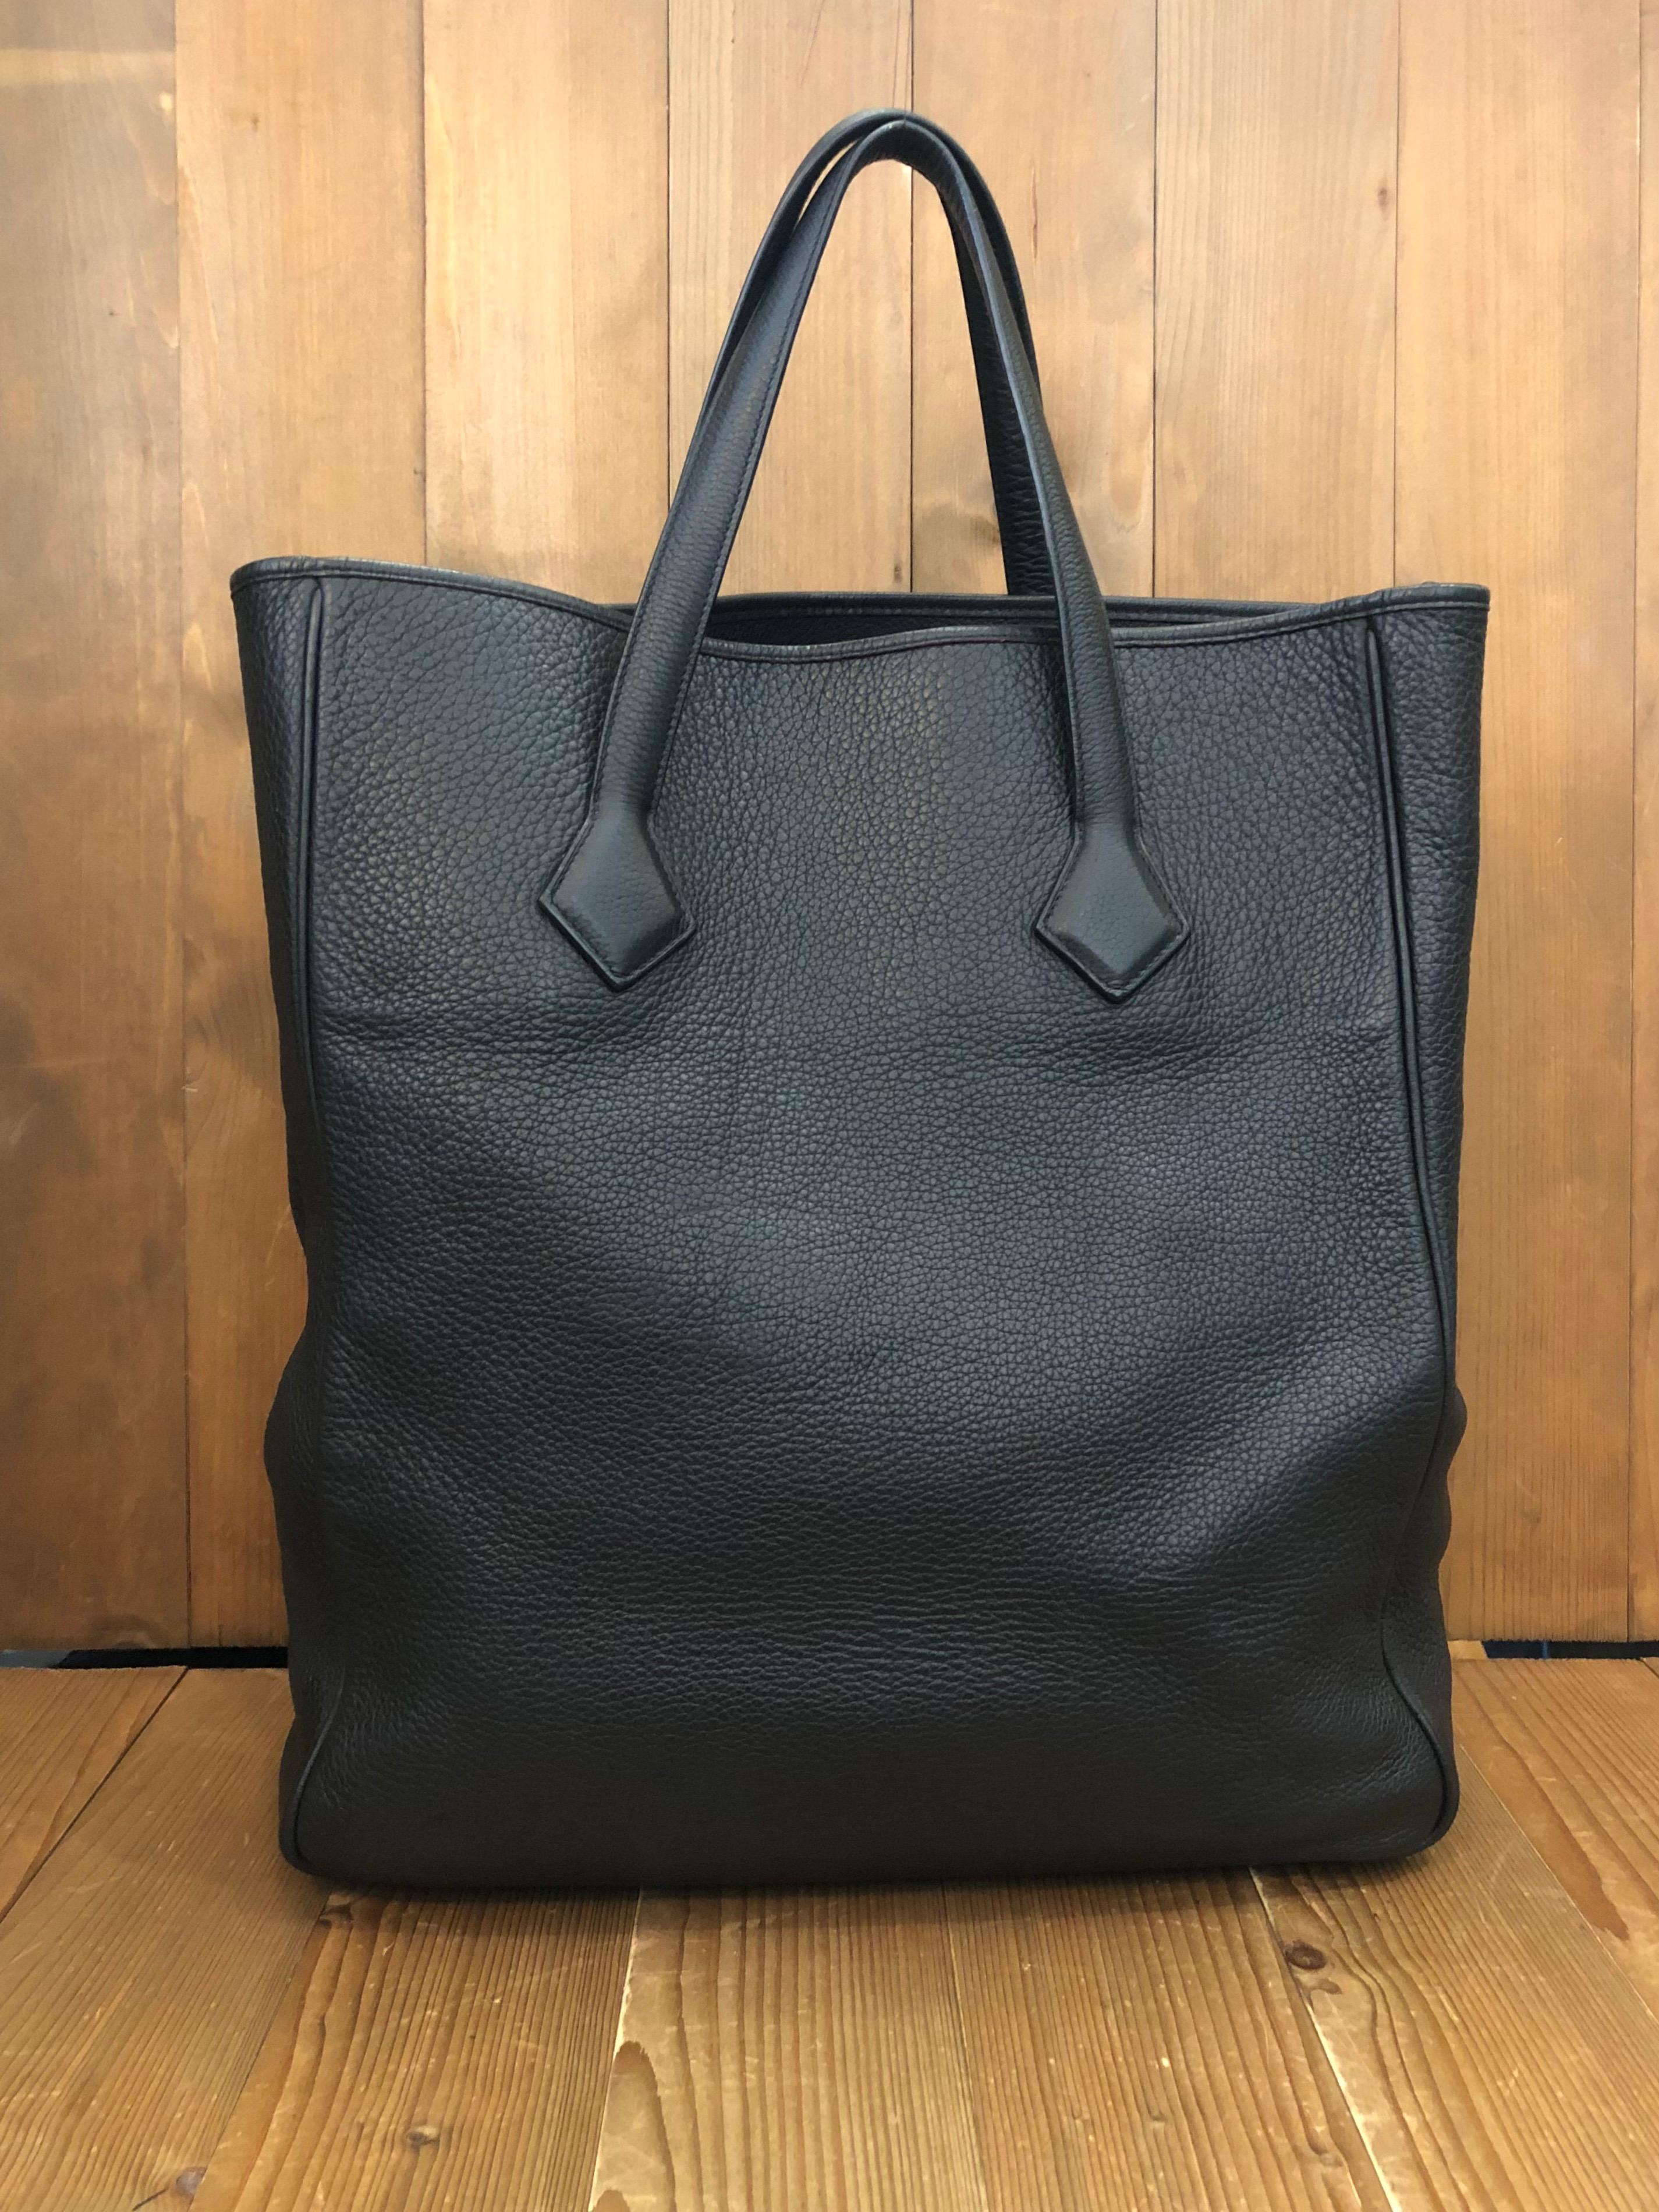 This stylish Hermes tote is crafted of taurillion clemence calfskin leather in black. This tote features two long leather straps for carrying on your shoulder comfortably. Wide top opens to a leather interior featuring a zippered pocket. This